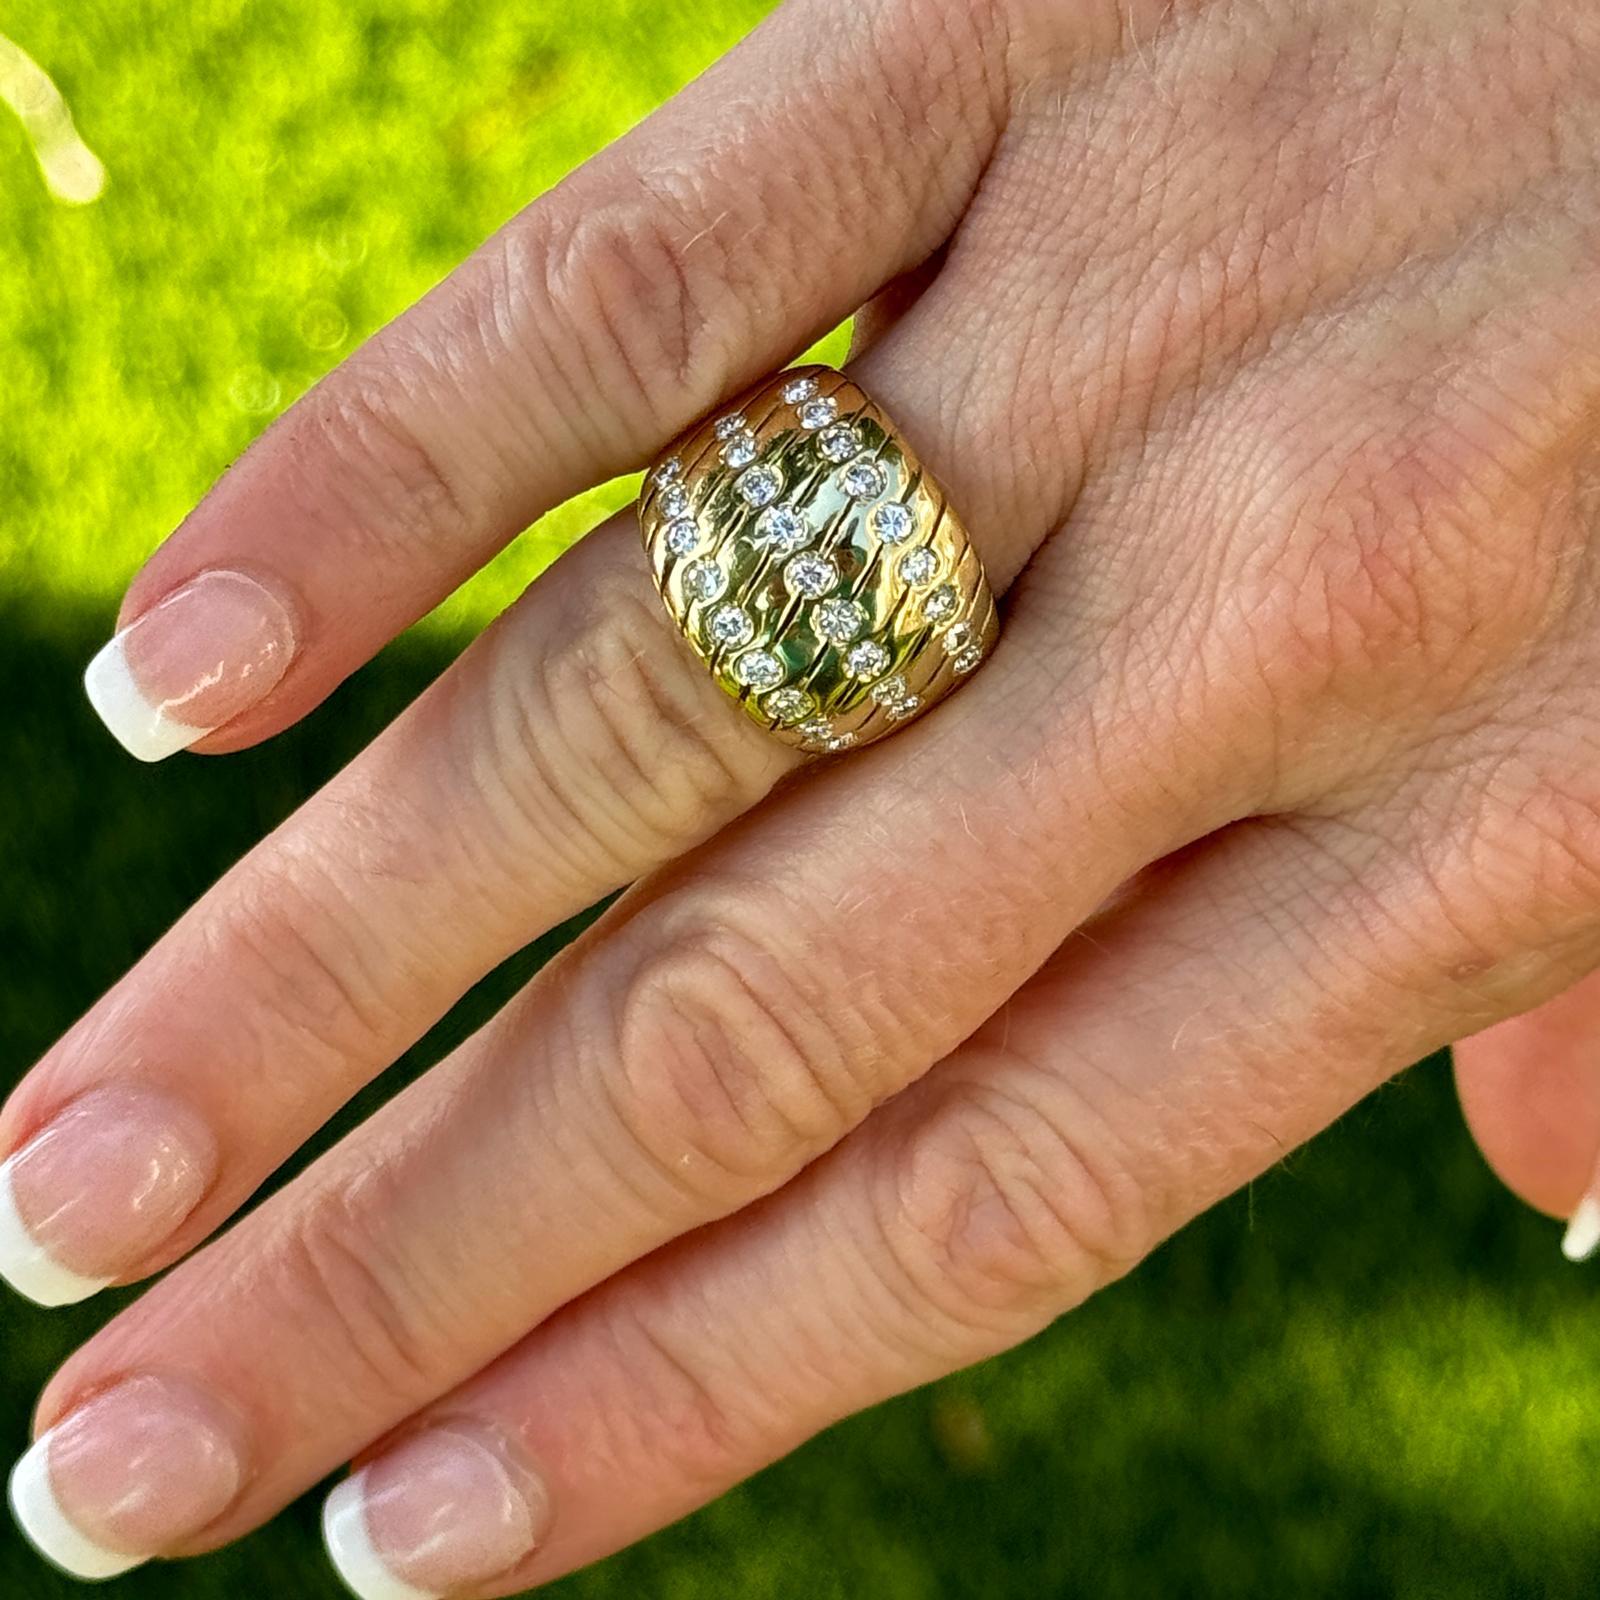 Diamond dome band ring crafted in 18 karat yellow gold. The band features 27 round brilliant cut diamonds weighing approximately 1.00 carat total weight and graded H-I color and SI clarity. The ring measures 16mm in width tapering down to 5mm and is